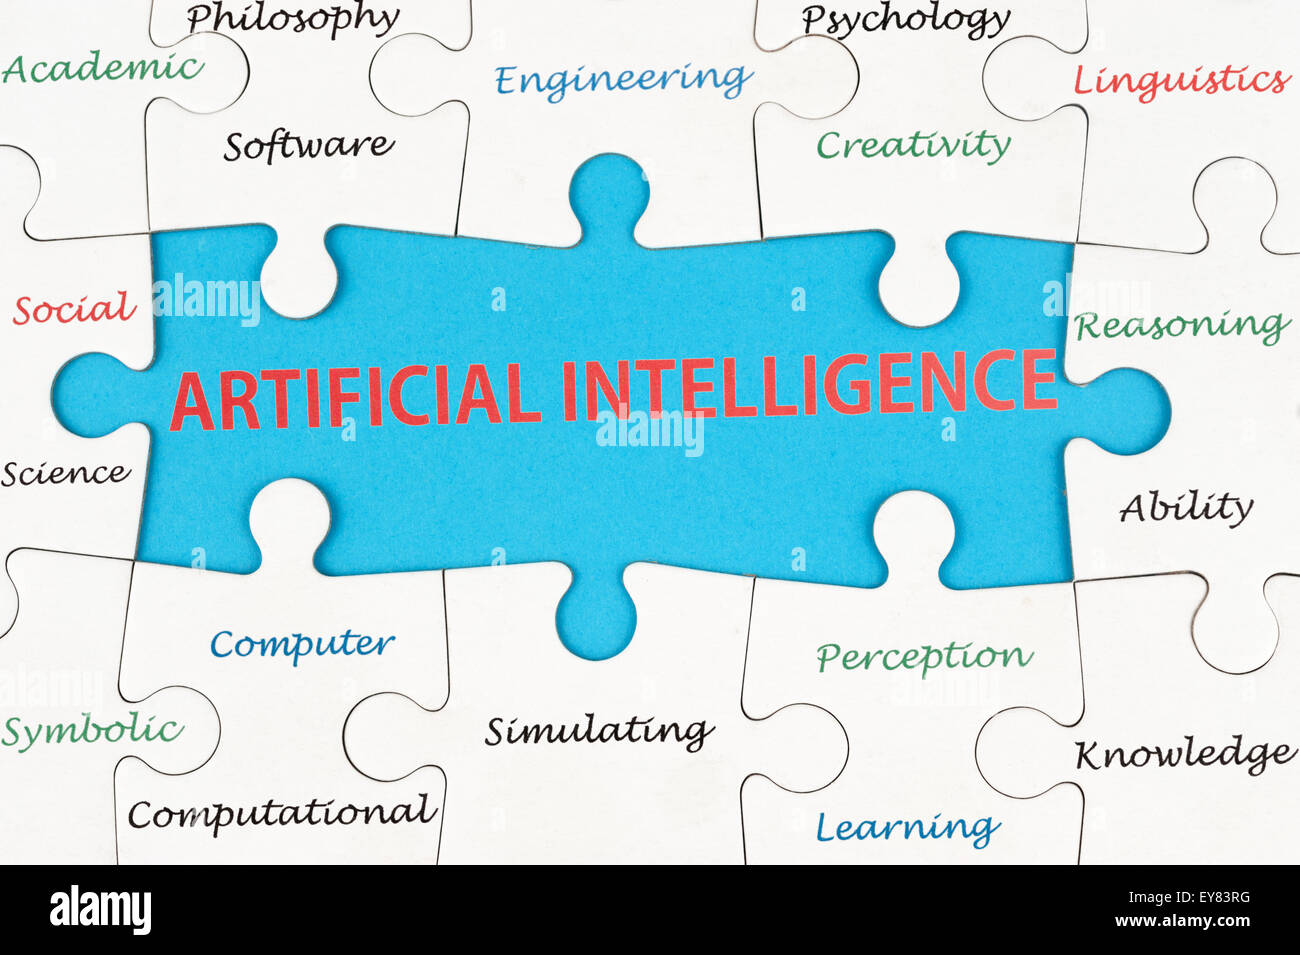 Artificial intelligence concept word cloud on group of jigsaw puzzle pieces Stock Photo